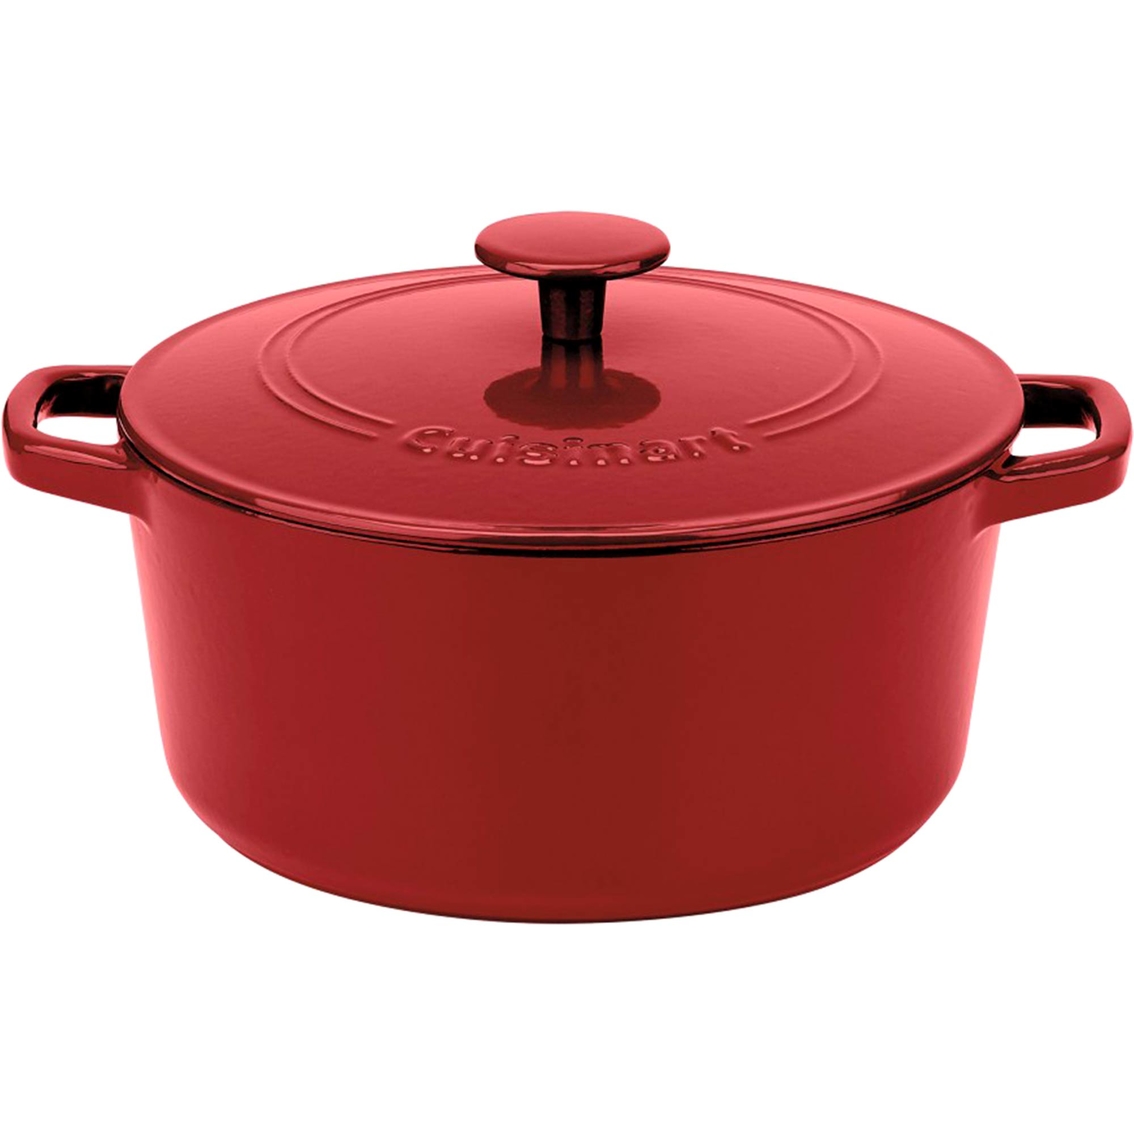 Cuisinart Chef's Classic Enameled Cast Iron 5-Quart Round Caserole in Cardinal Red